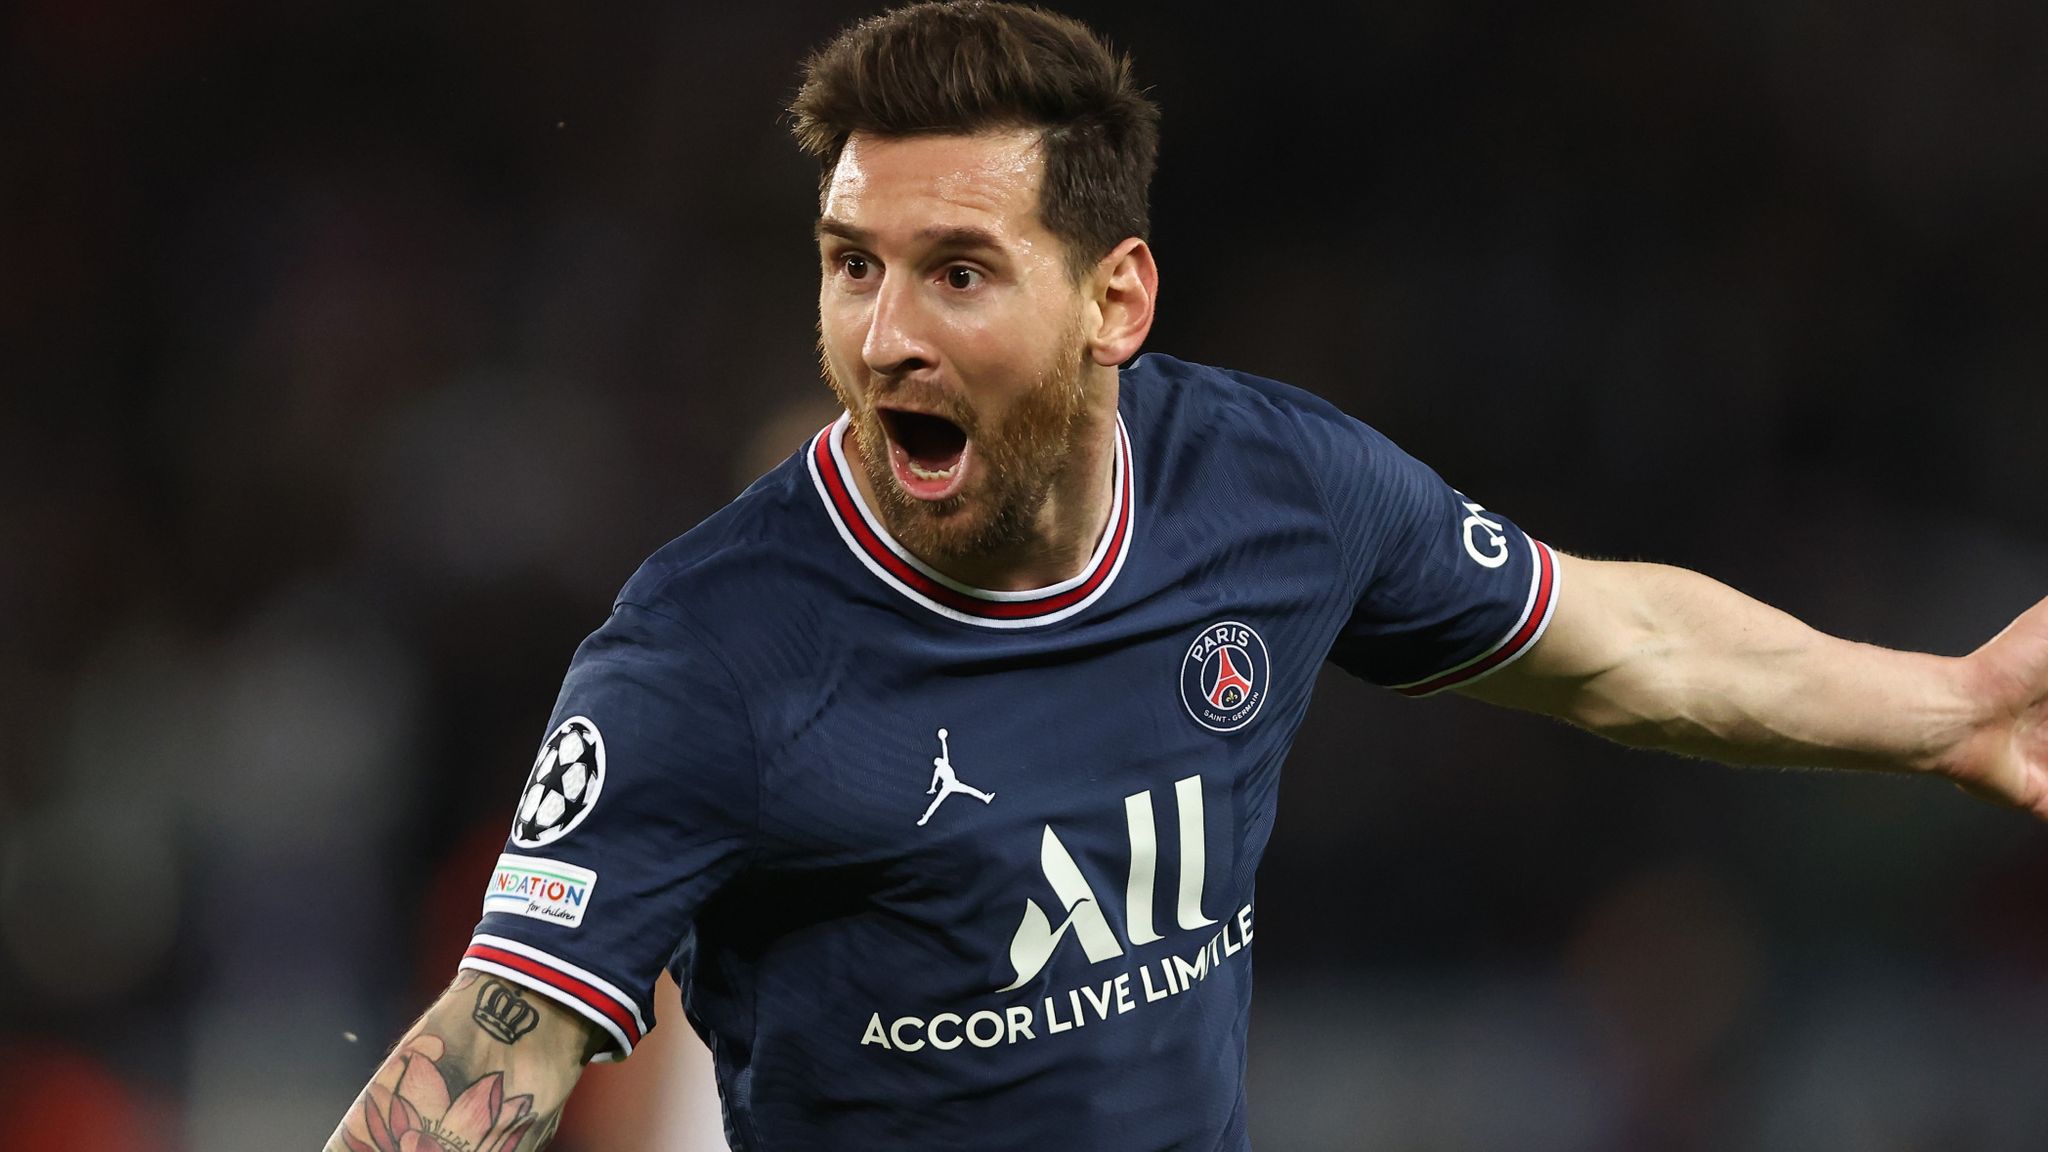 Paris Saint-Germain secured a vital three points towards their UEFA Champions League qualification as Lionel Messi scored his first goal for the Parisians